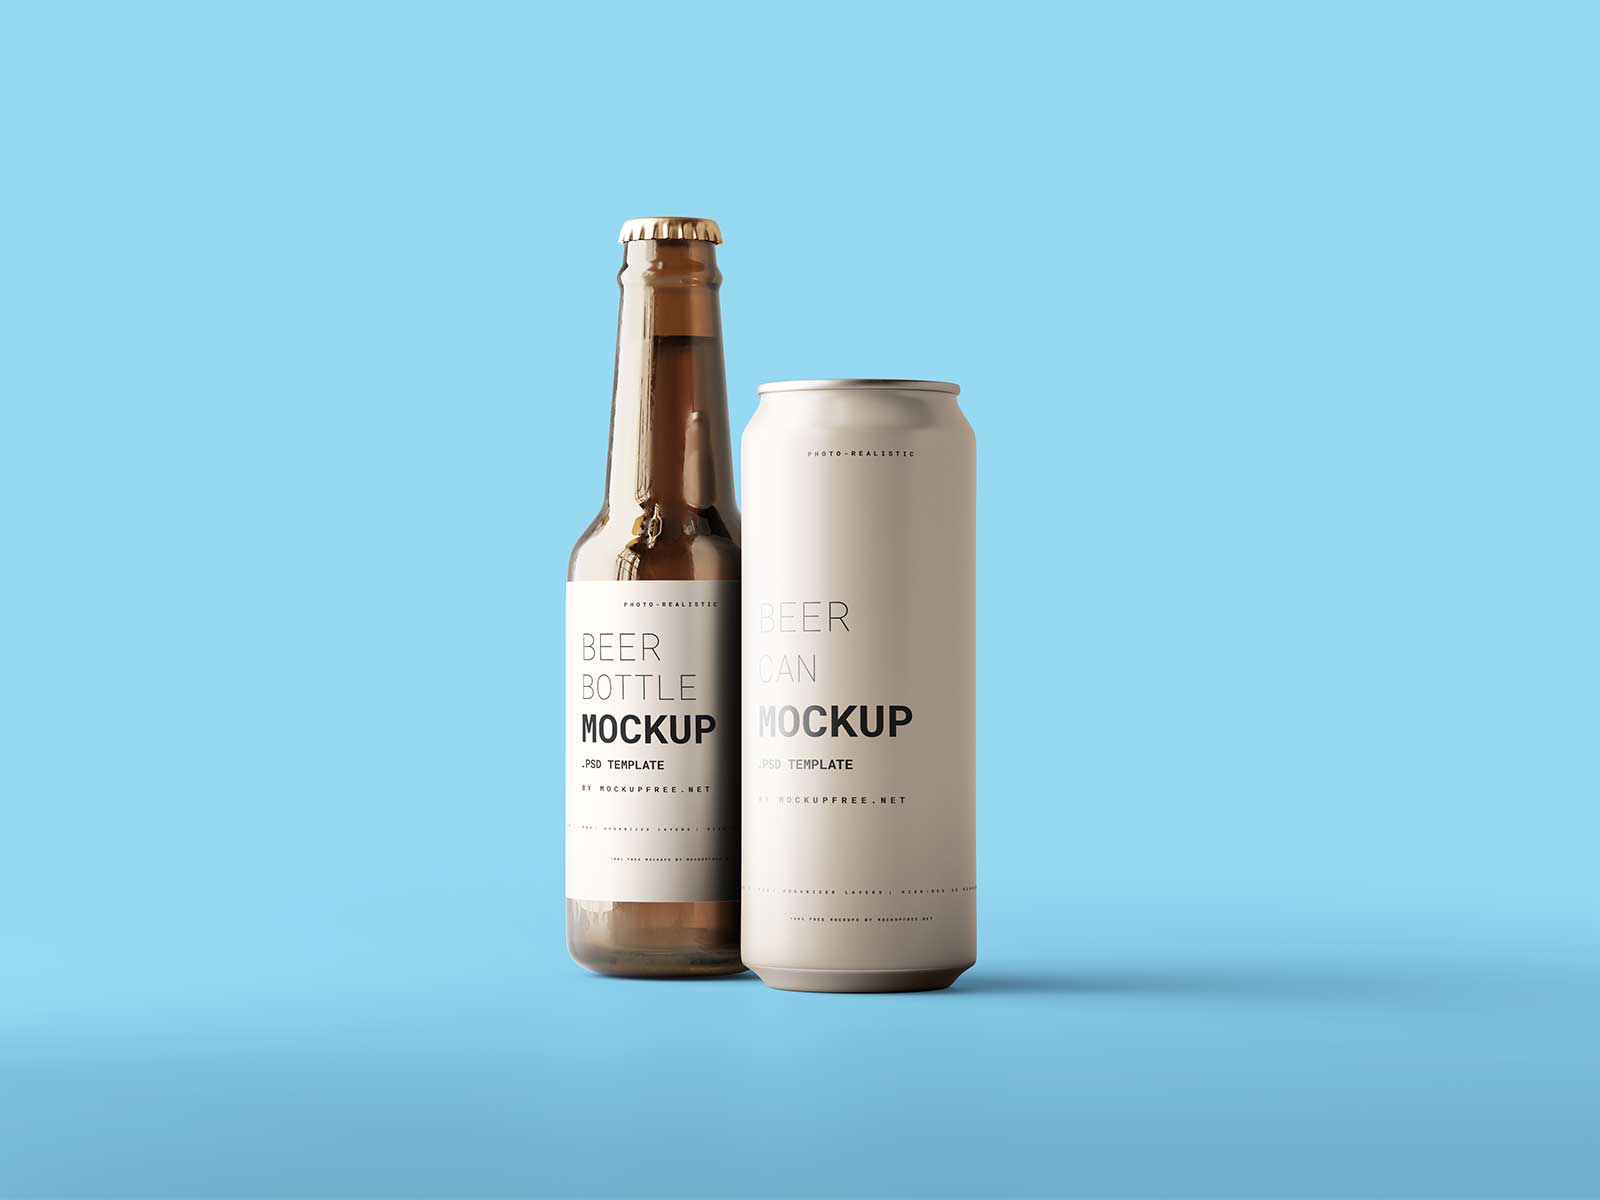 Beer Bottle Mockup with Can Mockup: A Refreshing Branding Experience